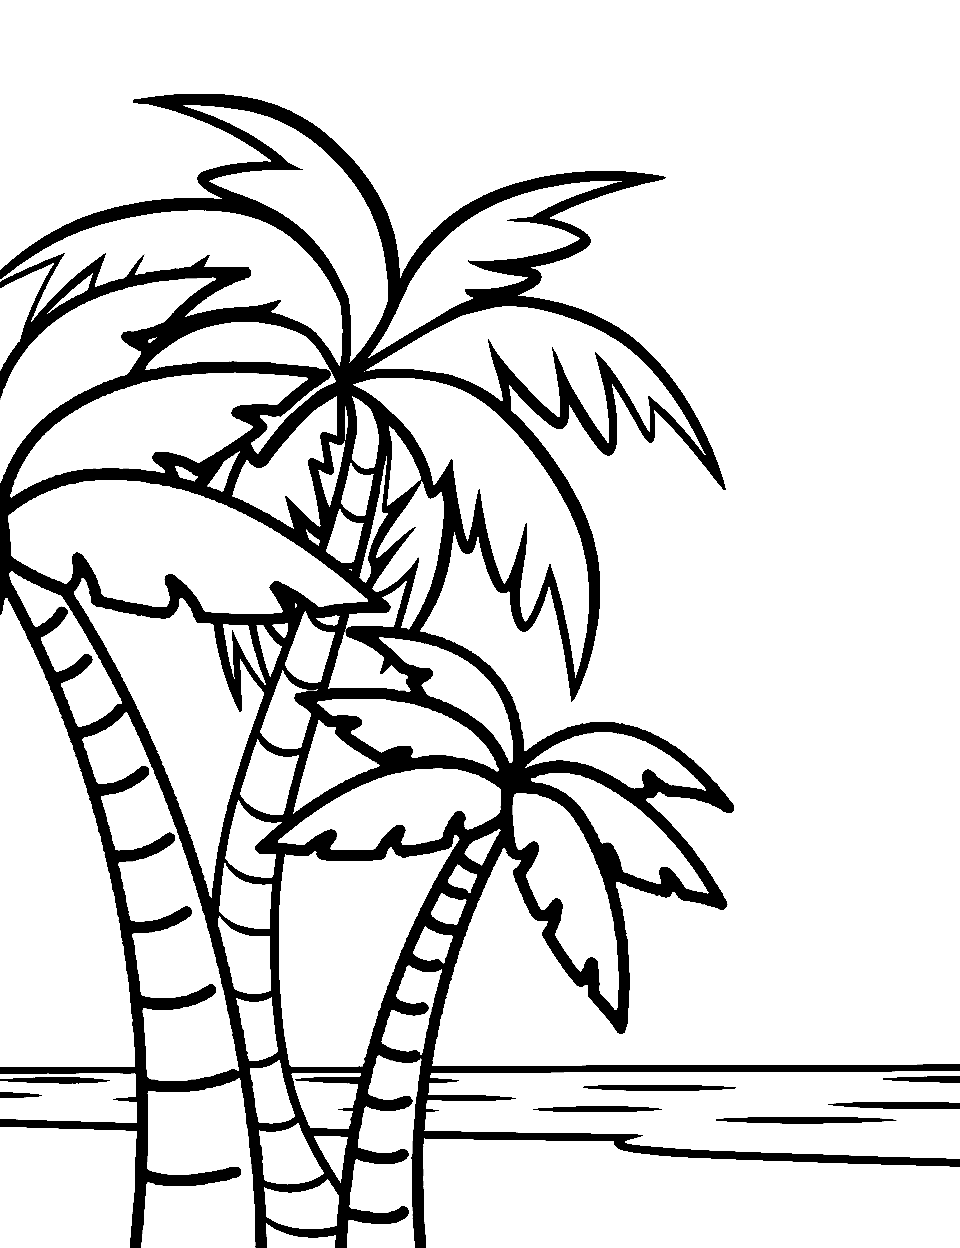 Palm Trees by the Shore Ocean Coloring Page - A few palm trees near the edge of the beach, with the ocean in the background.